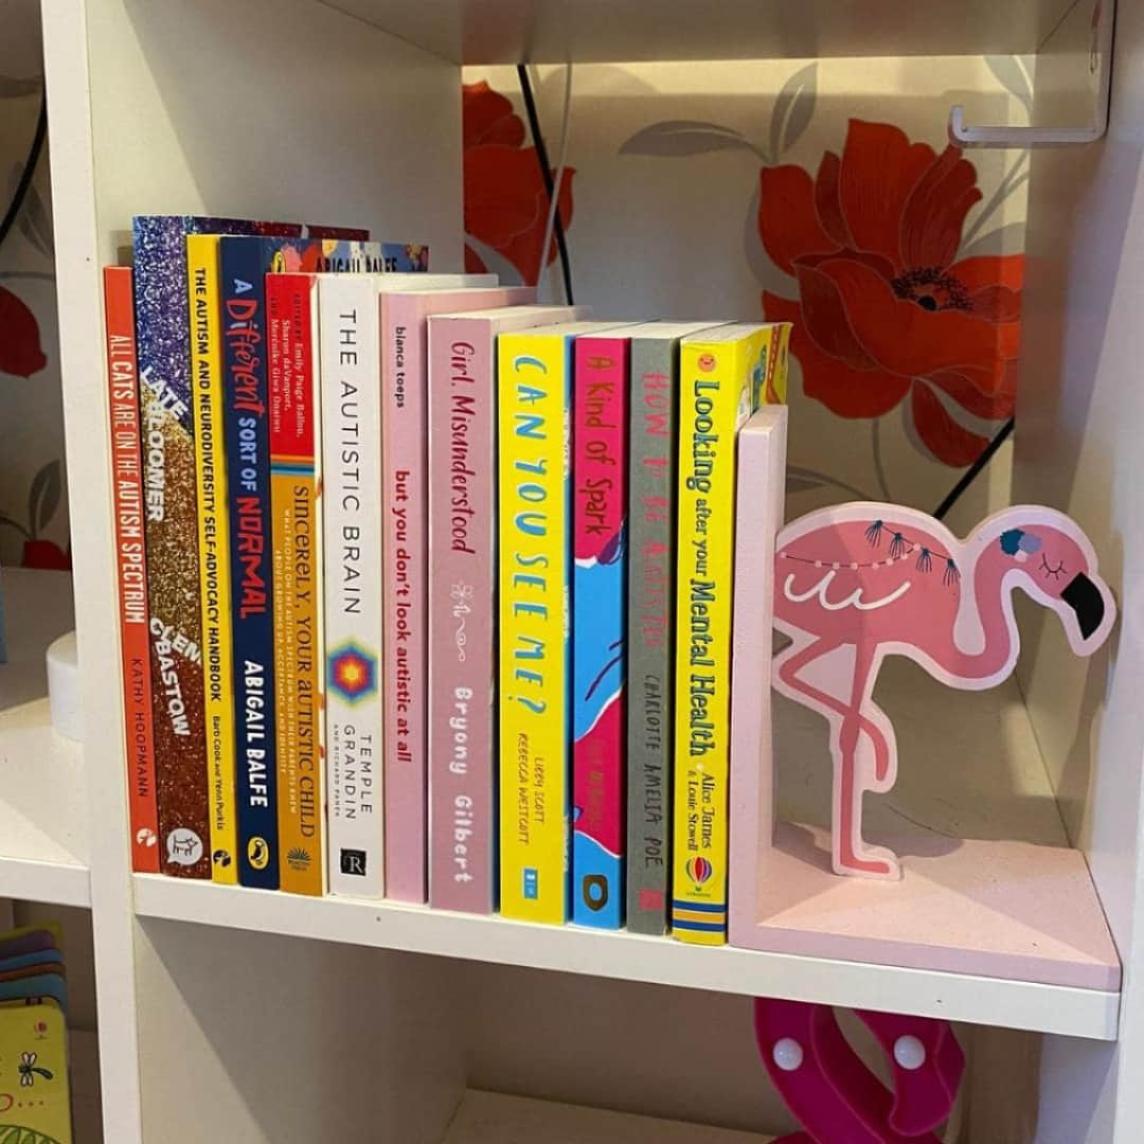 A selection of childrens books lined up on a book shelf